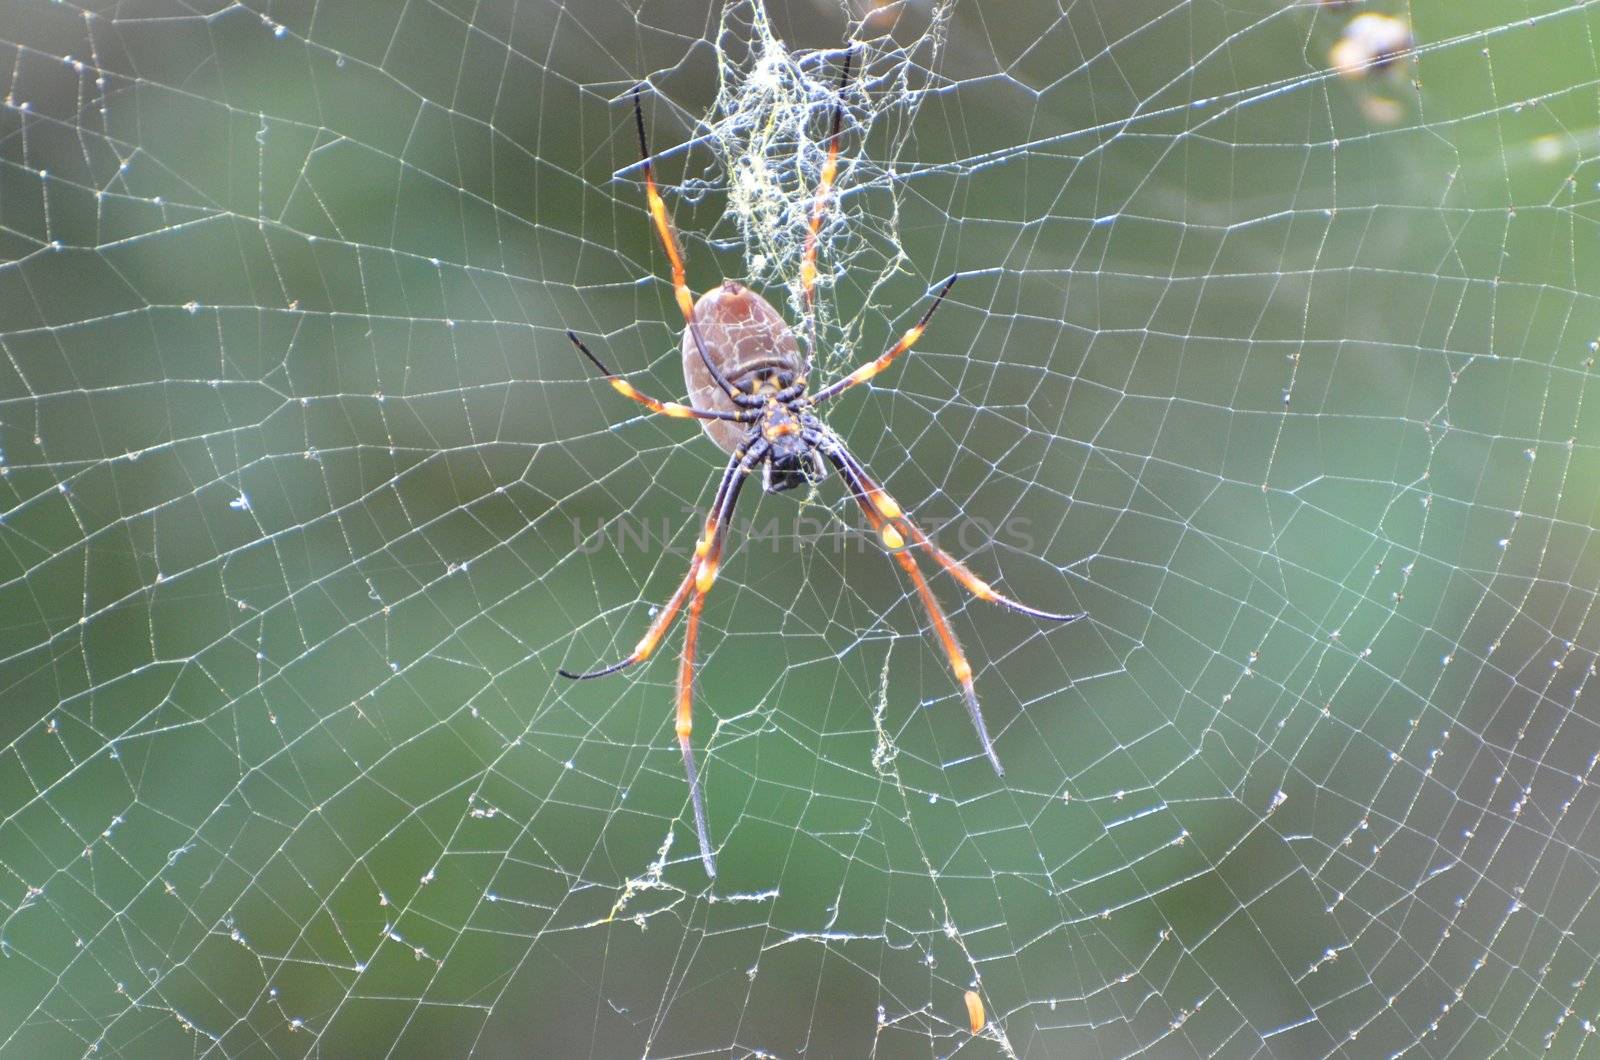 Spider on Web by ianmck